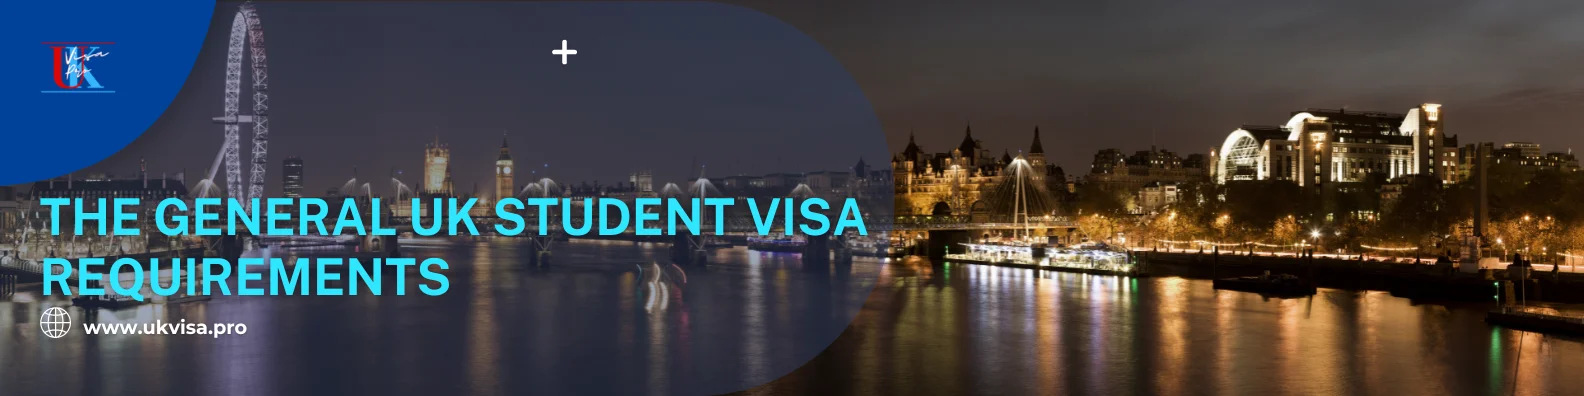 Study in the UK - The General UK Student Visa Requirements